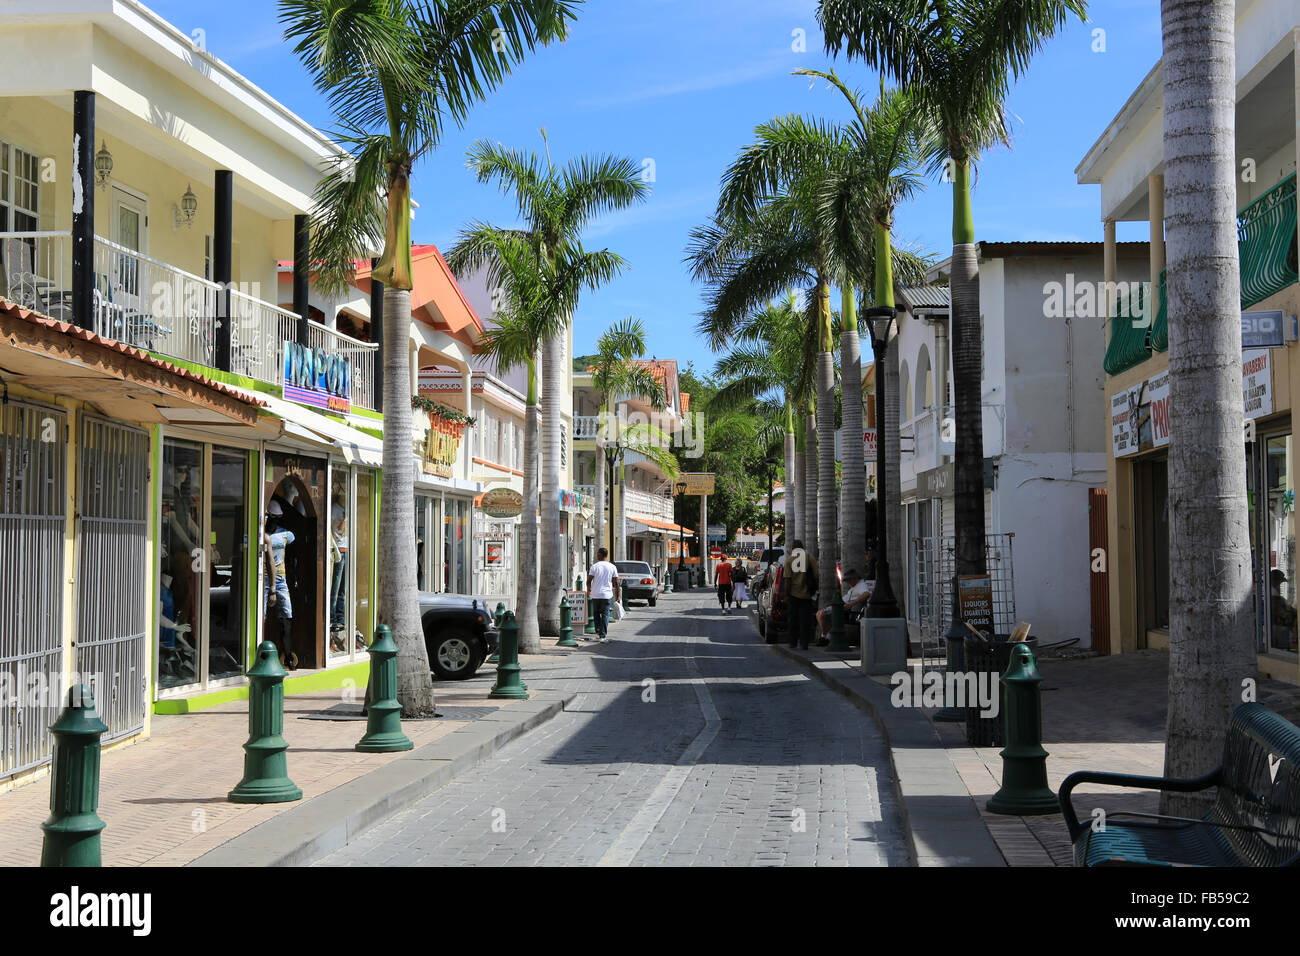 Front Street, one of the main shopping areas in Philipsburg, the capital city of Sint Maarten in the Netherlans Antilles. Stock Photo